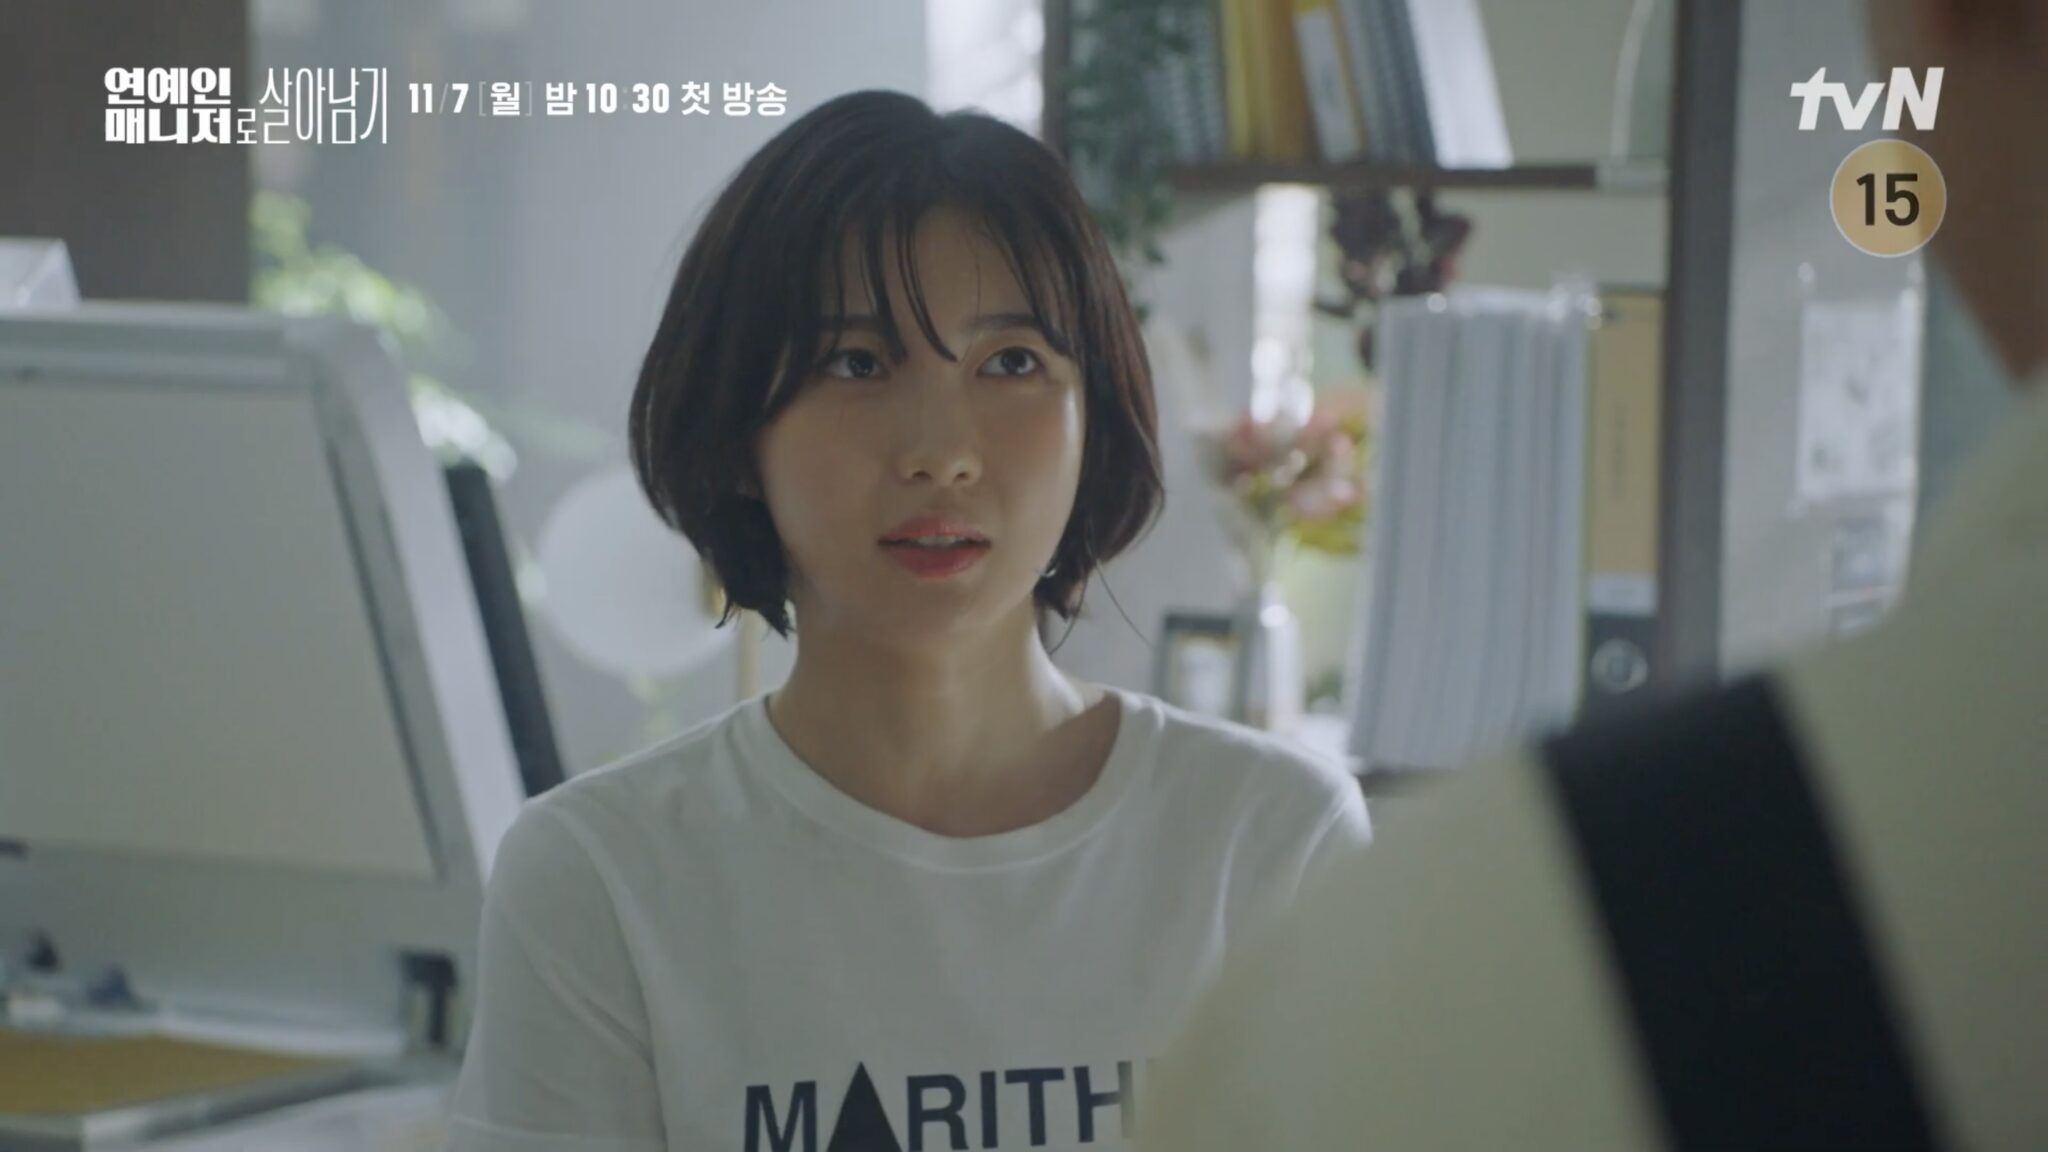 A glimpse into the hard work Behind Every Star in tvN's latest teaser